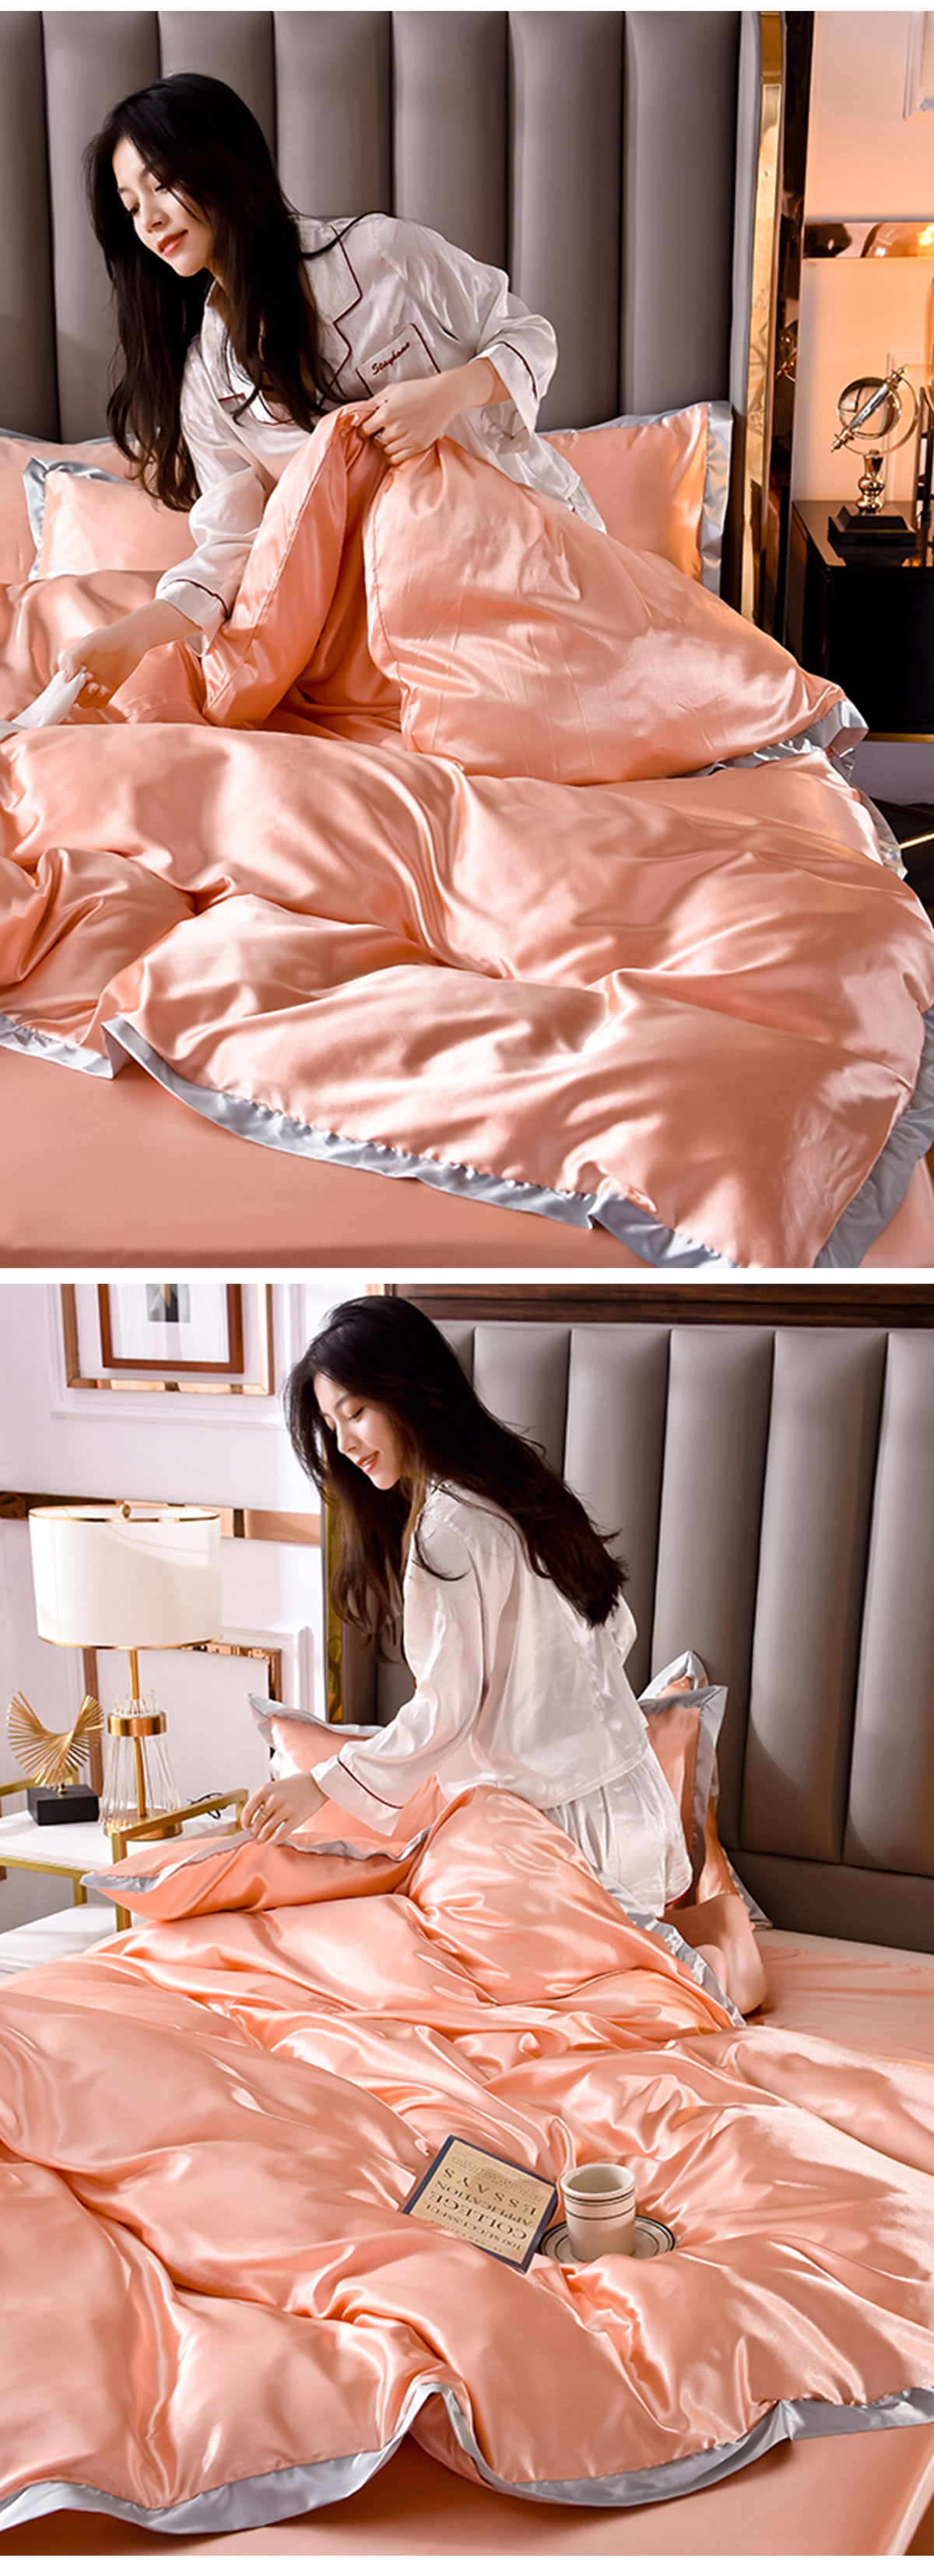 Fresh-and-Soft-Comfortable-Satin-Bed-Cover-Sheet-Set46.jpg